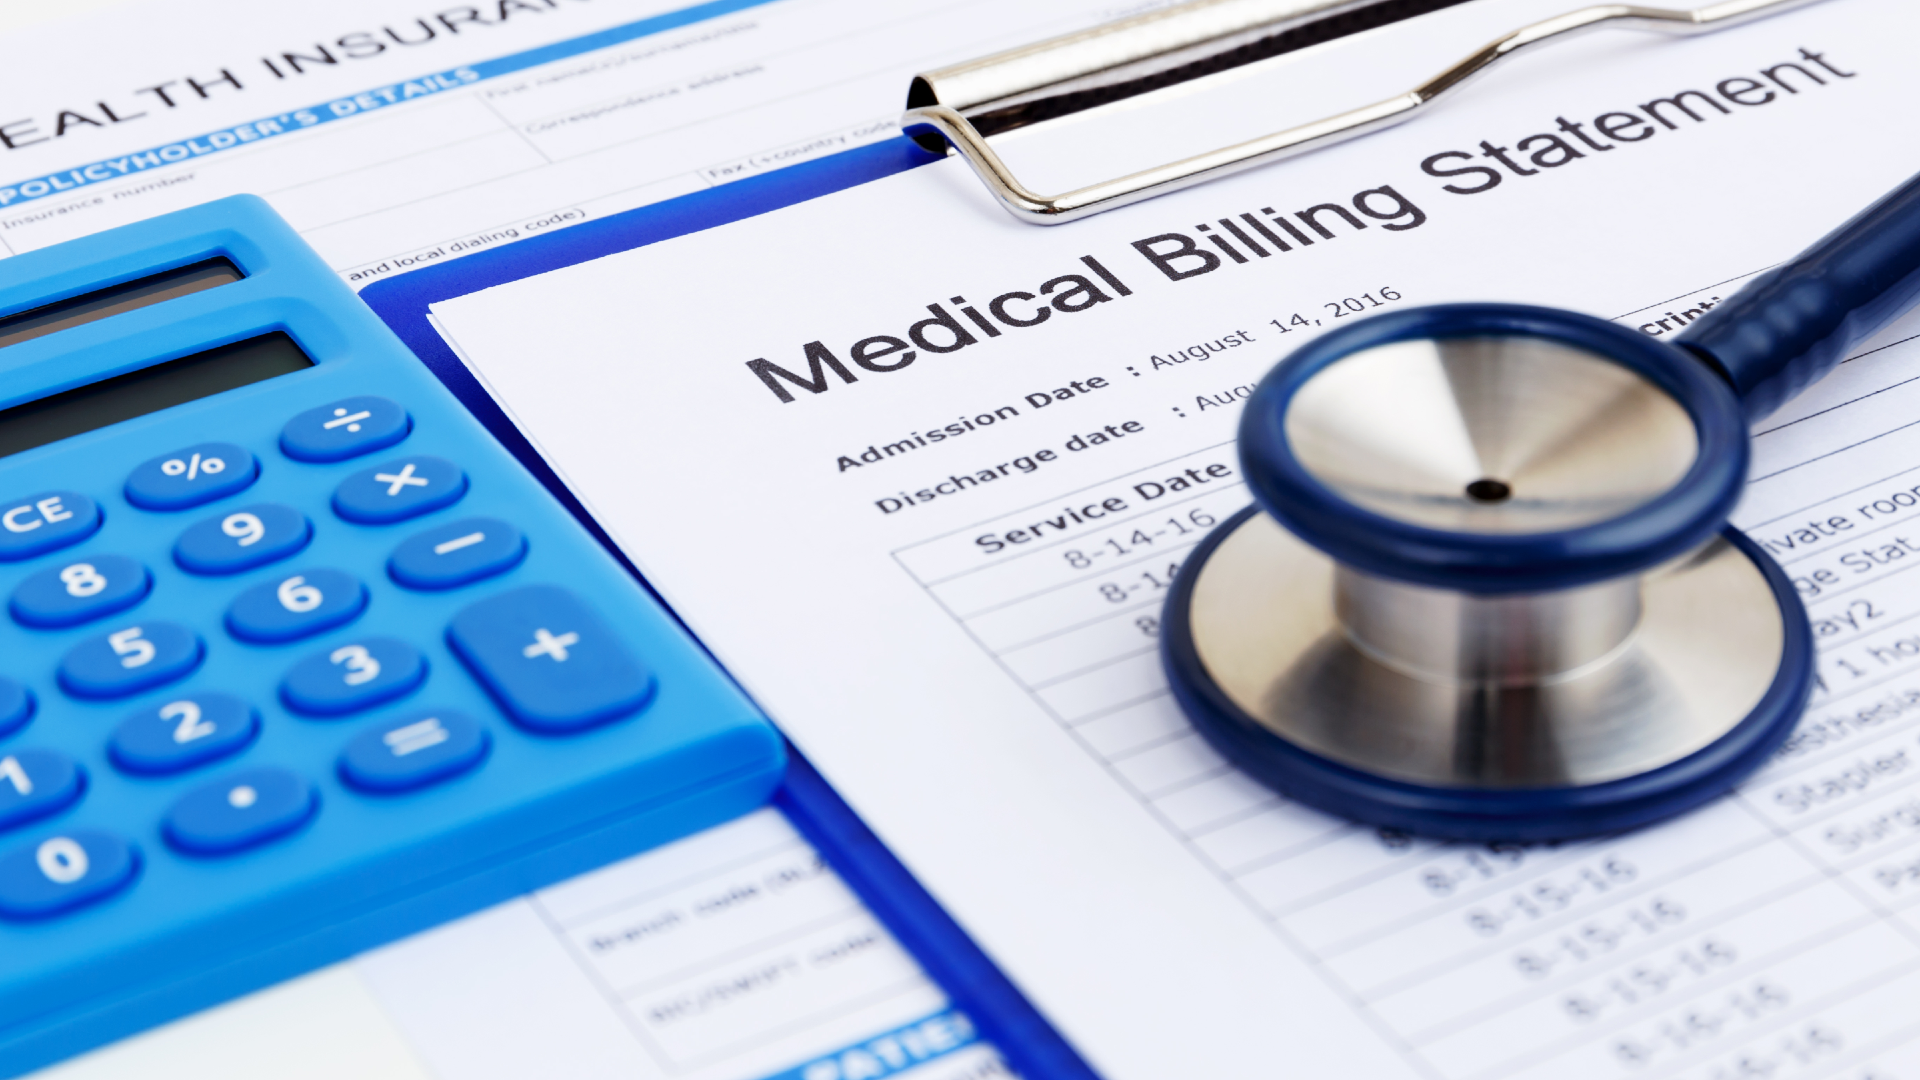 A medical billing statement near a stethoscope and a calculator